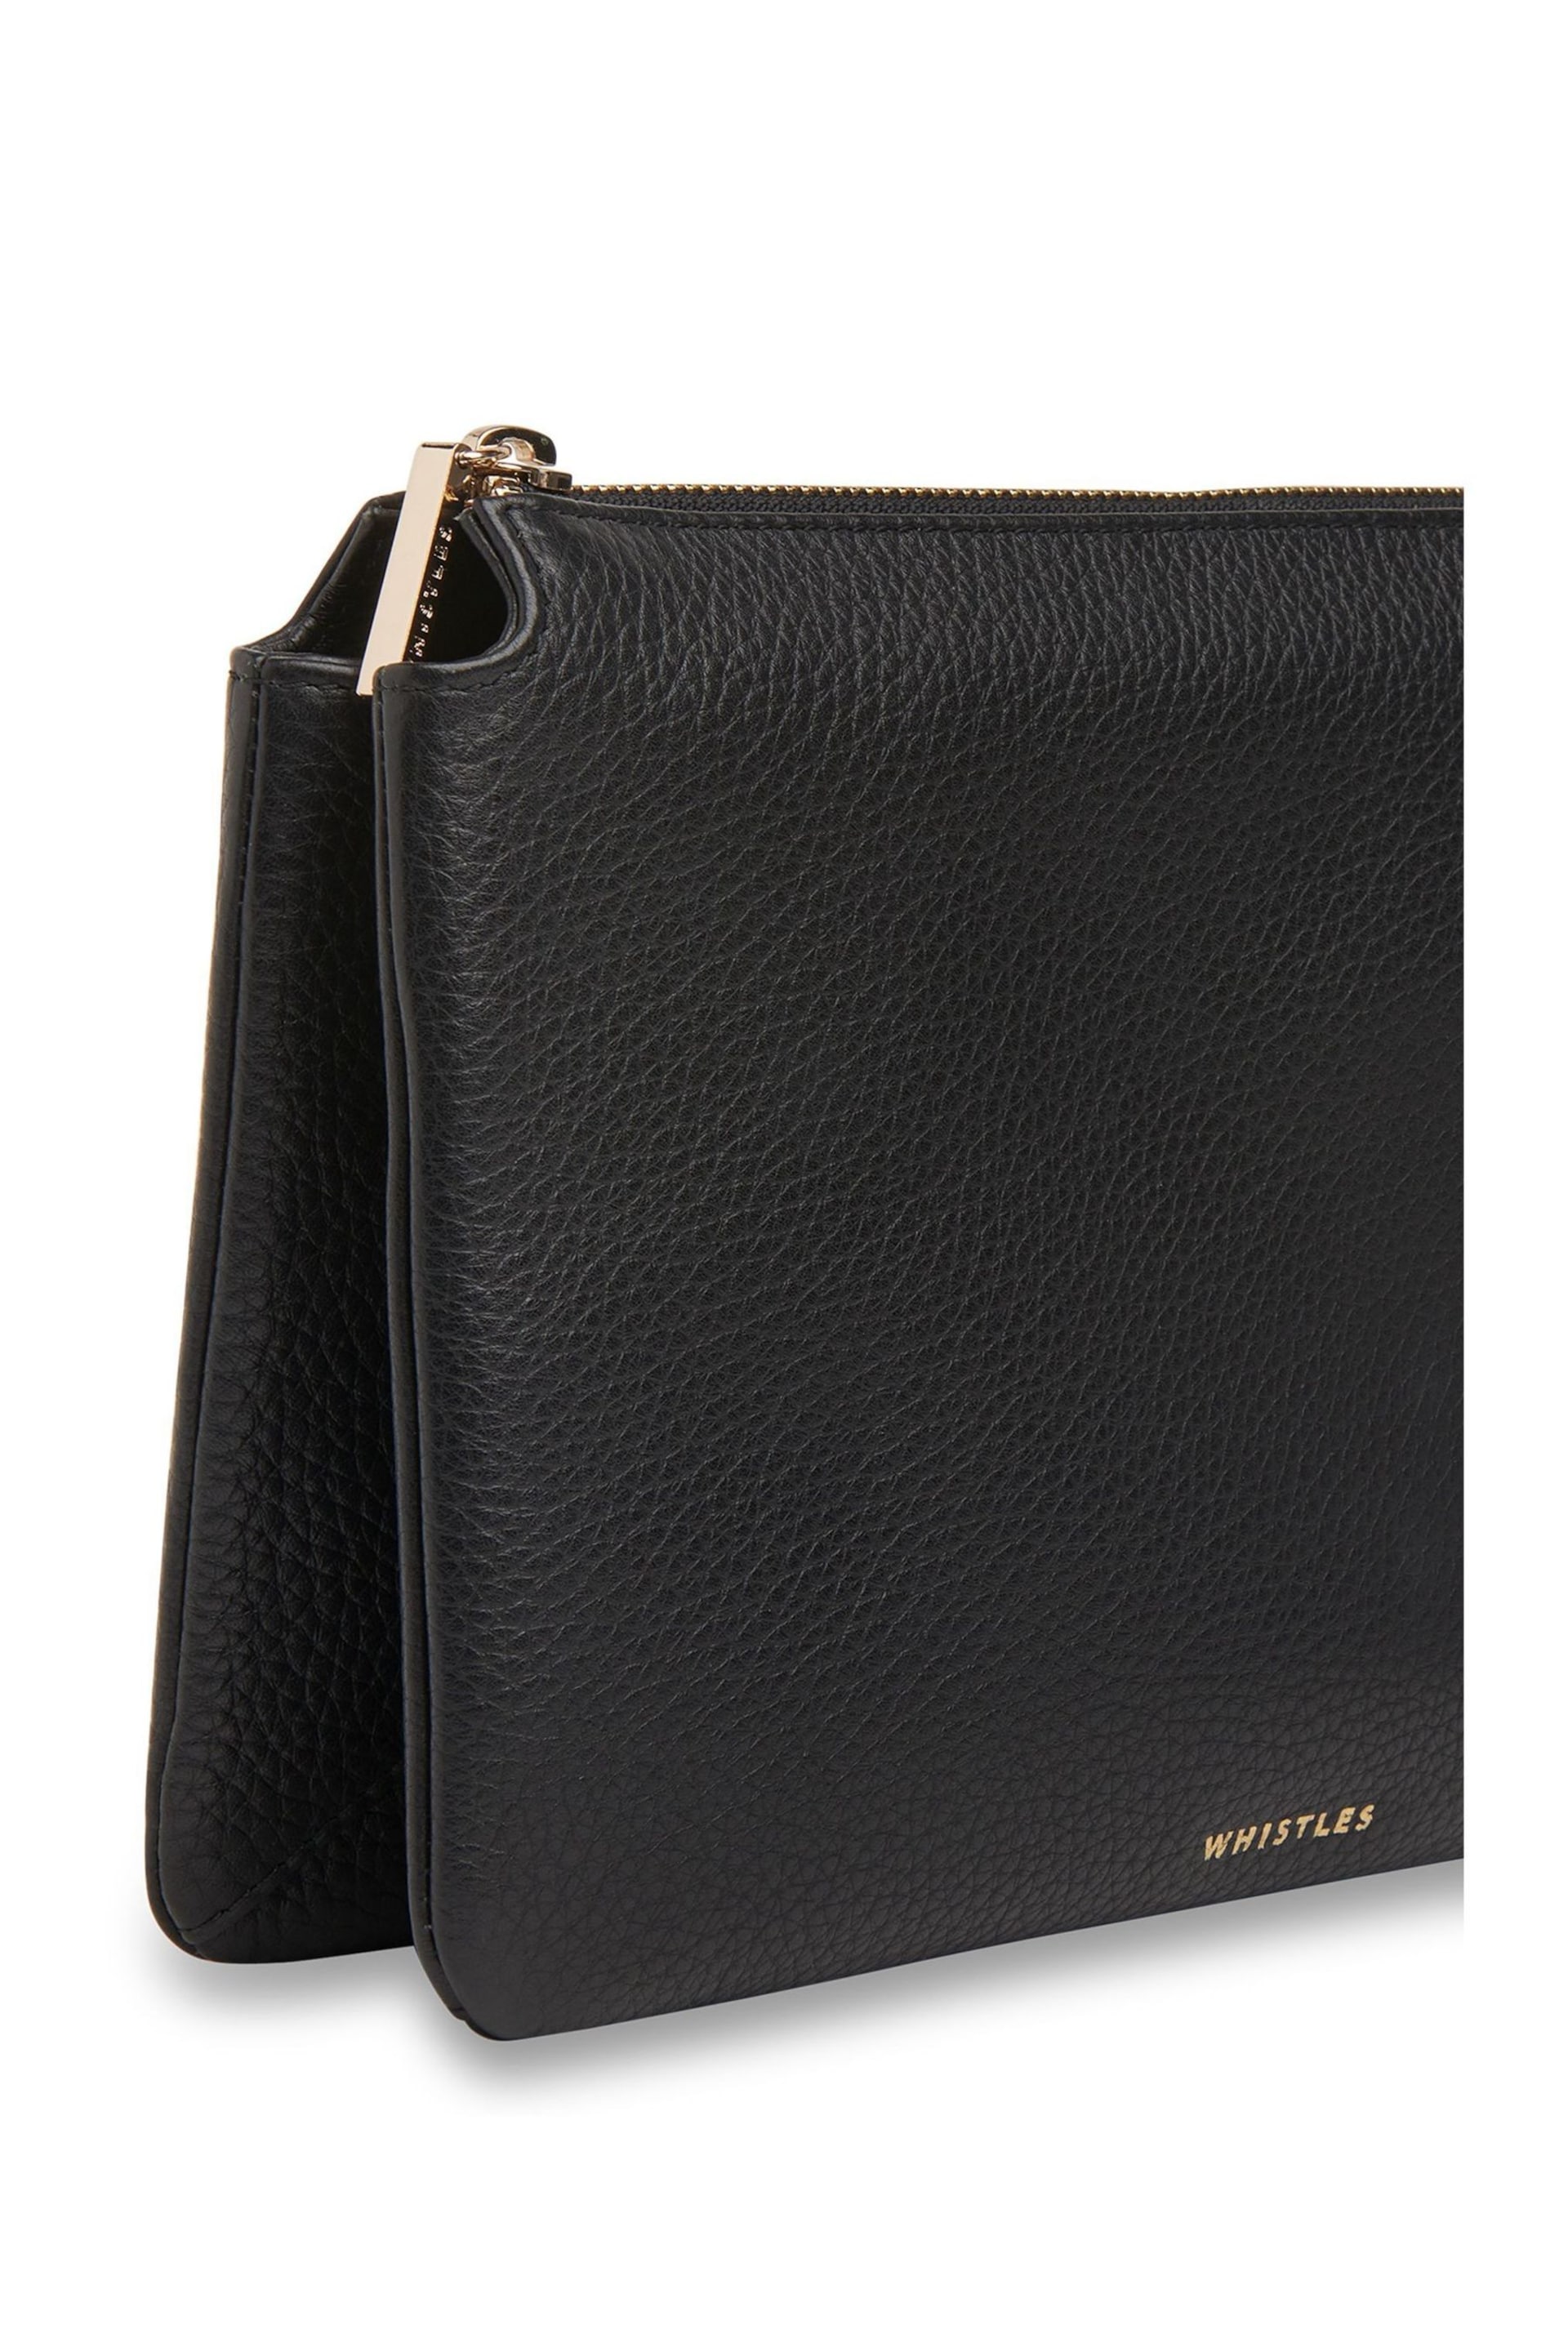 Whistles Gold Elita Double Pouch Clutch - Image 4 of 4